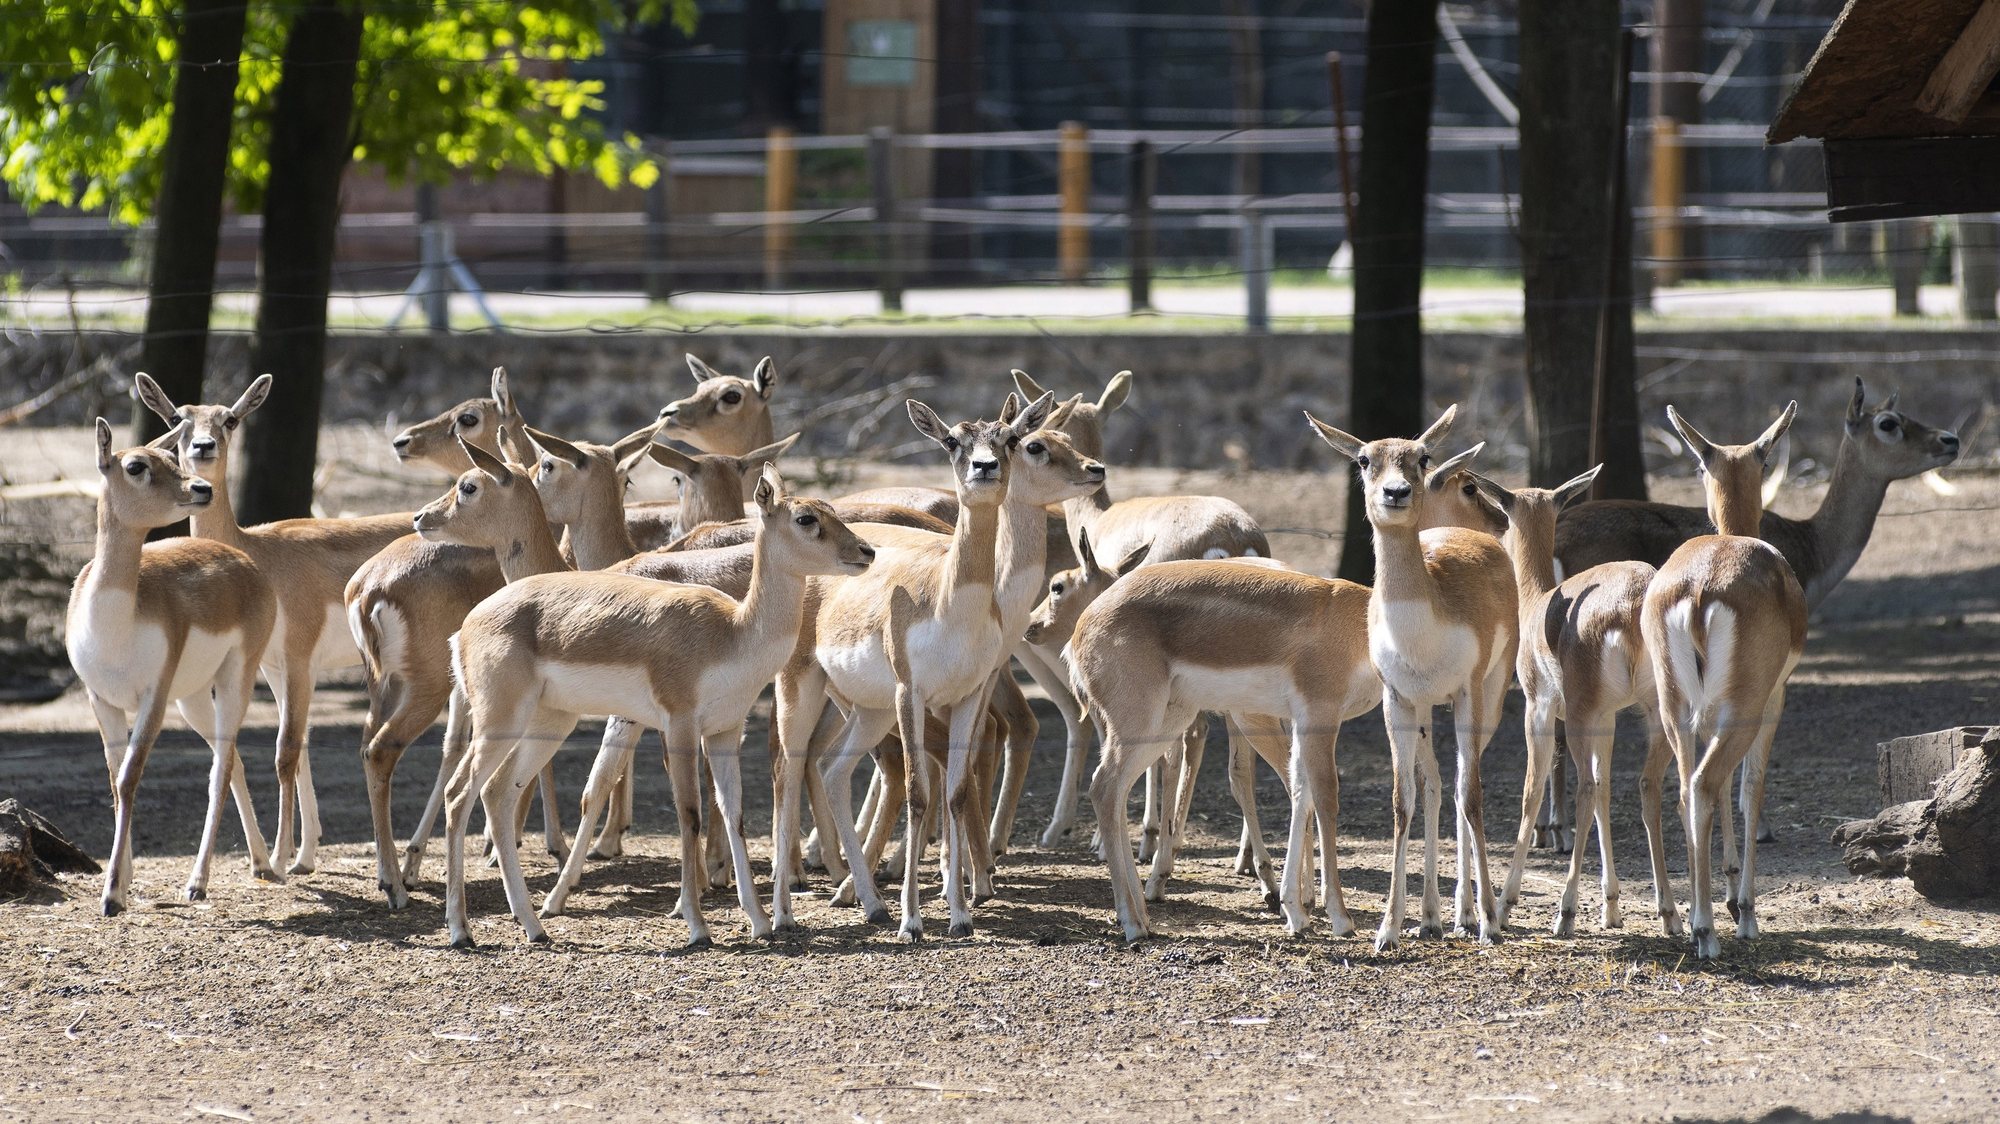 epa08410304 Indian antelopes (Antilope cervicapra) stand in their enclosure at Nyiregyhaza Animal Park, which was re-opened after 46 days of closure, in Nyiregyhaza, Hungary, 08 May 2020. Zoos are allowed to re-open their areas under strict safety measures outside Budapest and Pest County as authorities began to ease some of the measures implemented to slow down the ongoing pandemic of the COVID-19 disease caused by the SARS-CoV-2 coronavirus.  EPA/Attila Balazs HUNGARY OUT